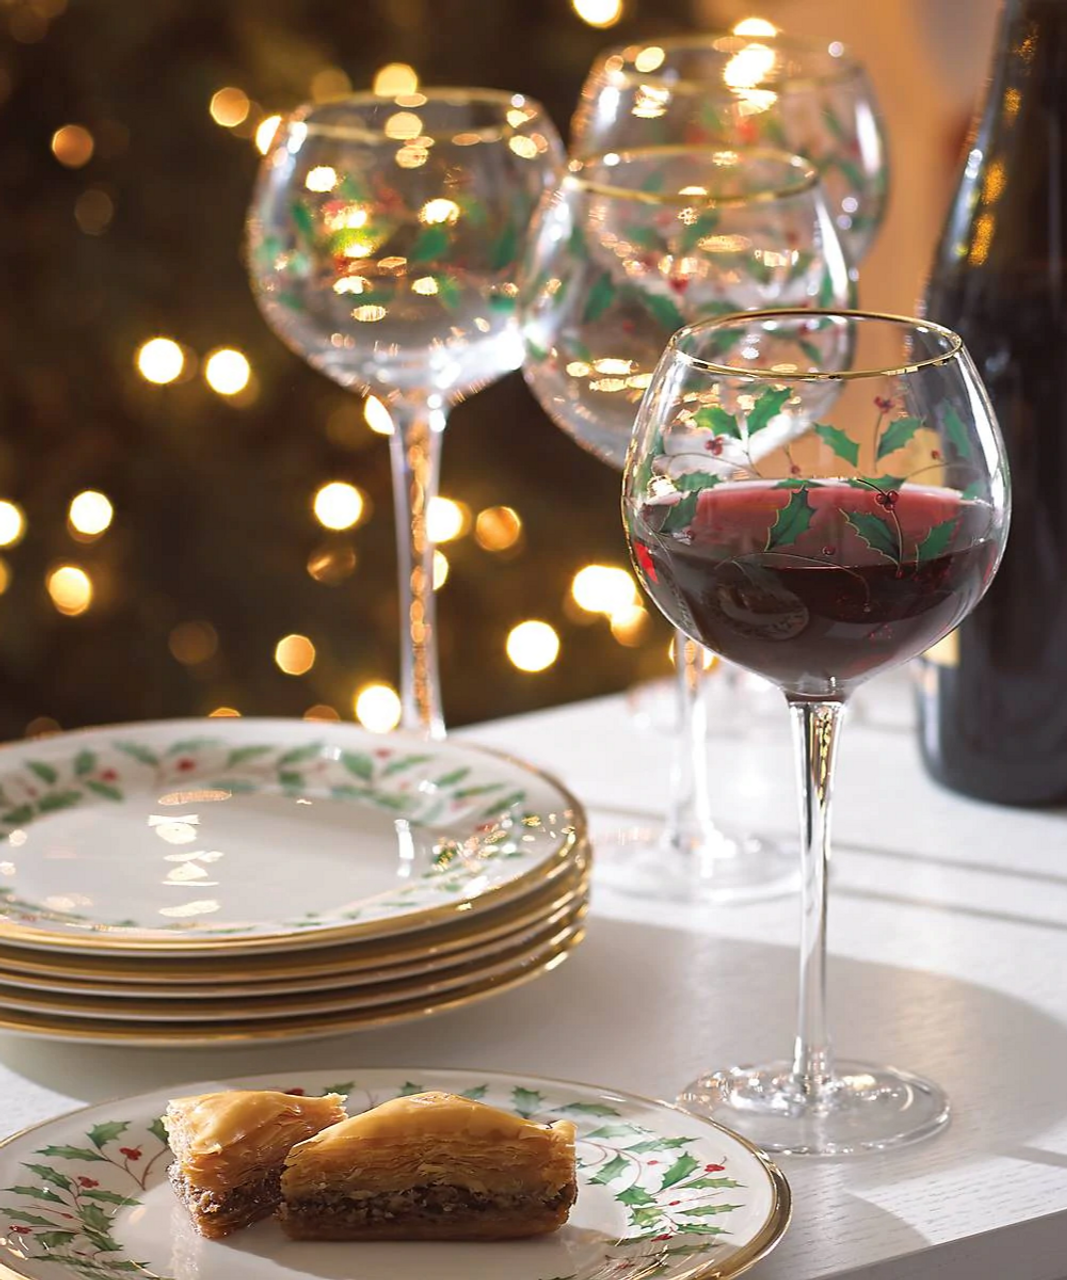 https://cdn11.bigcommerce.com/s-qv8xcg1pwn/images/stencil/1280x1280/products/4832/22528/Lenox_Holiday_Glassware_Red_and_Green_Holly_Leaves__72695.1647195096.png?c=1